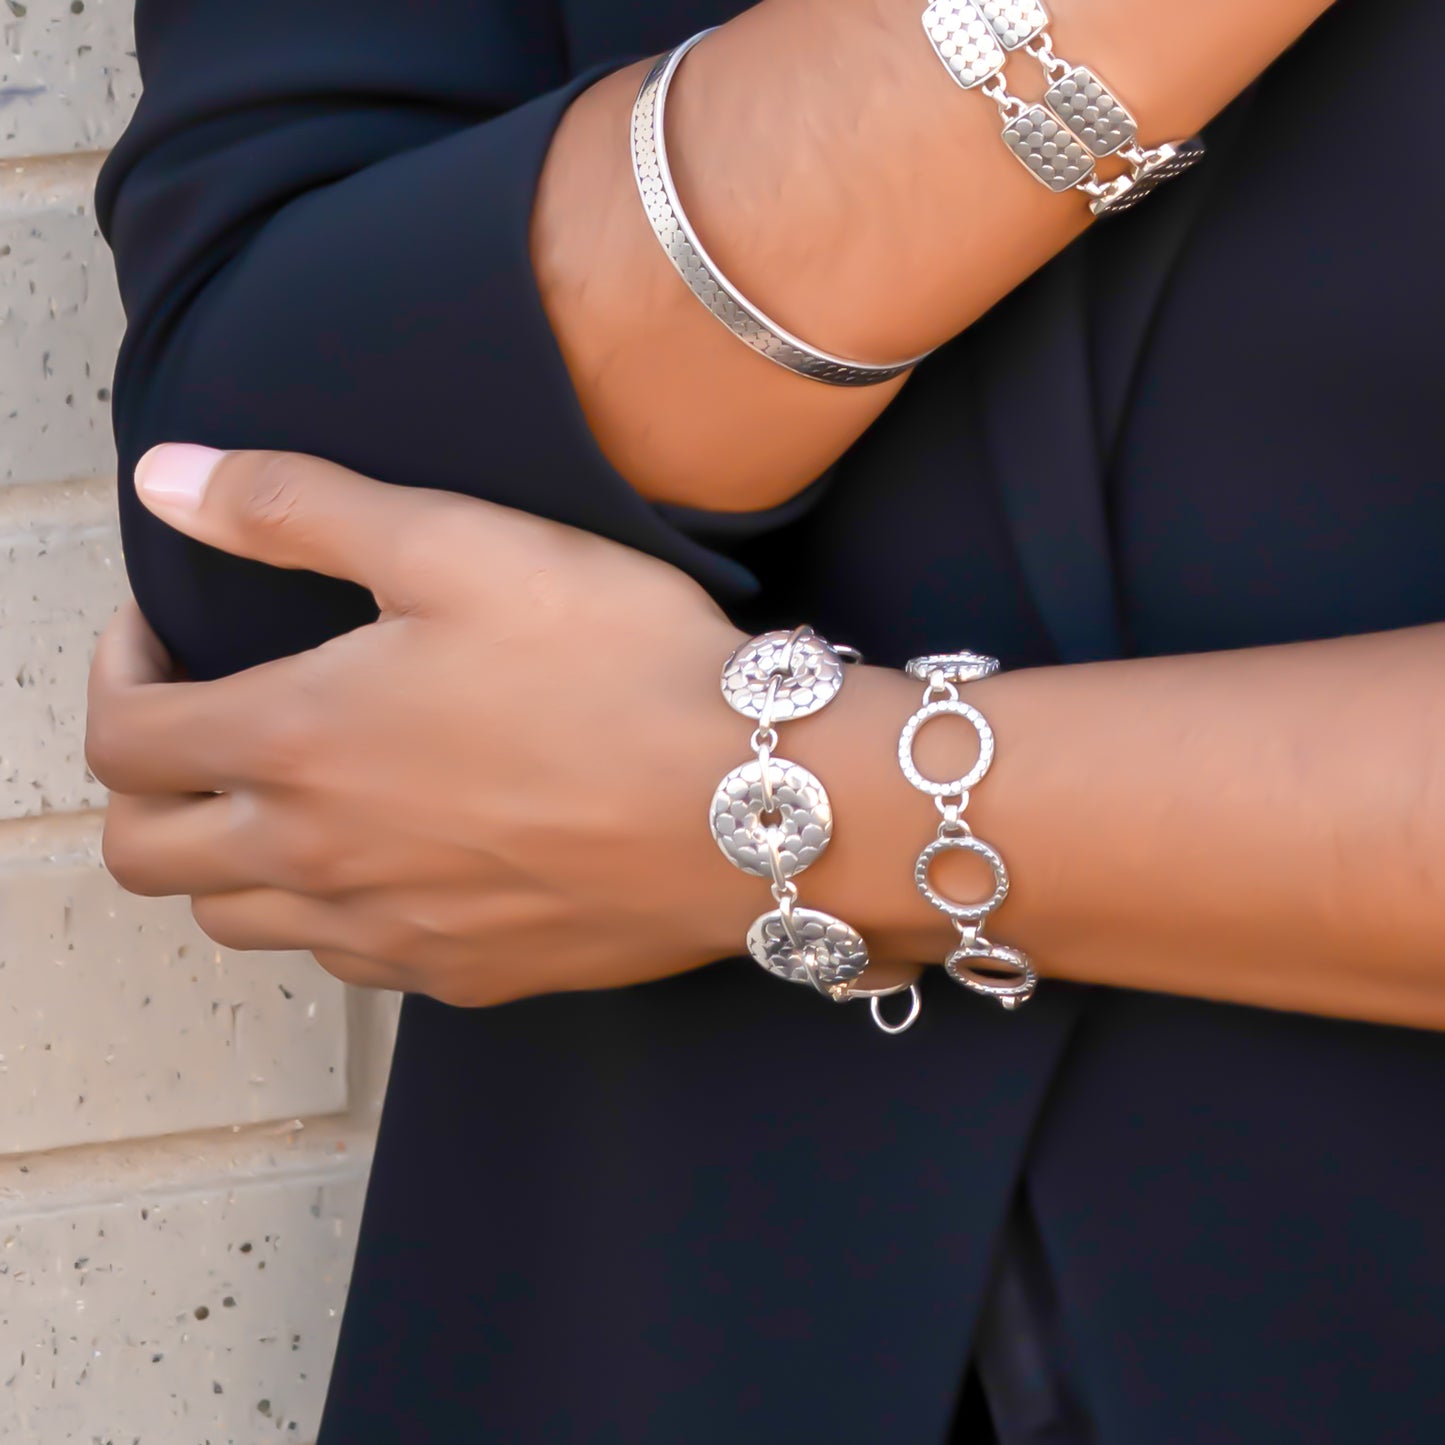 Woman wearing different silver bracelets with polished round dot shapes.